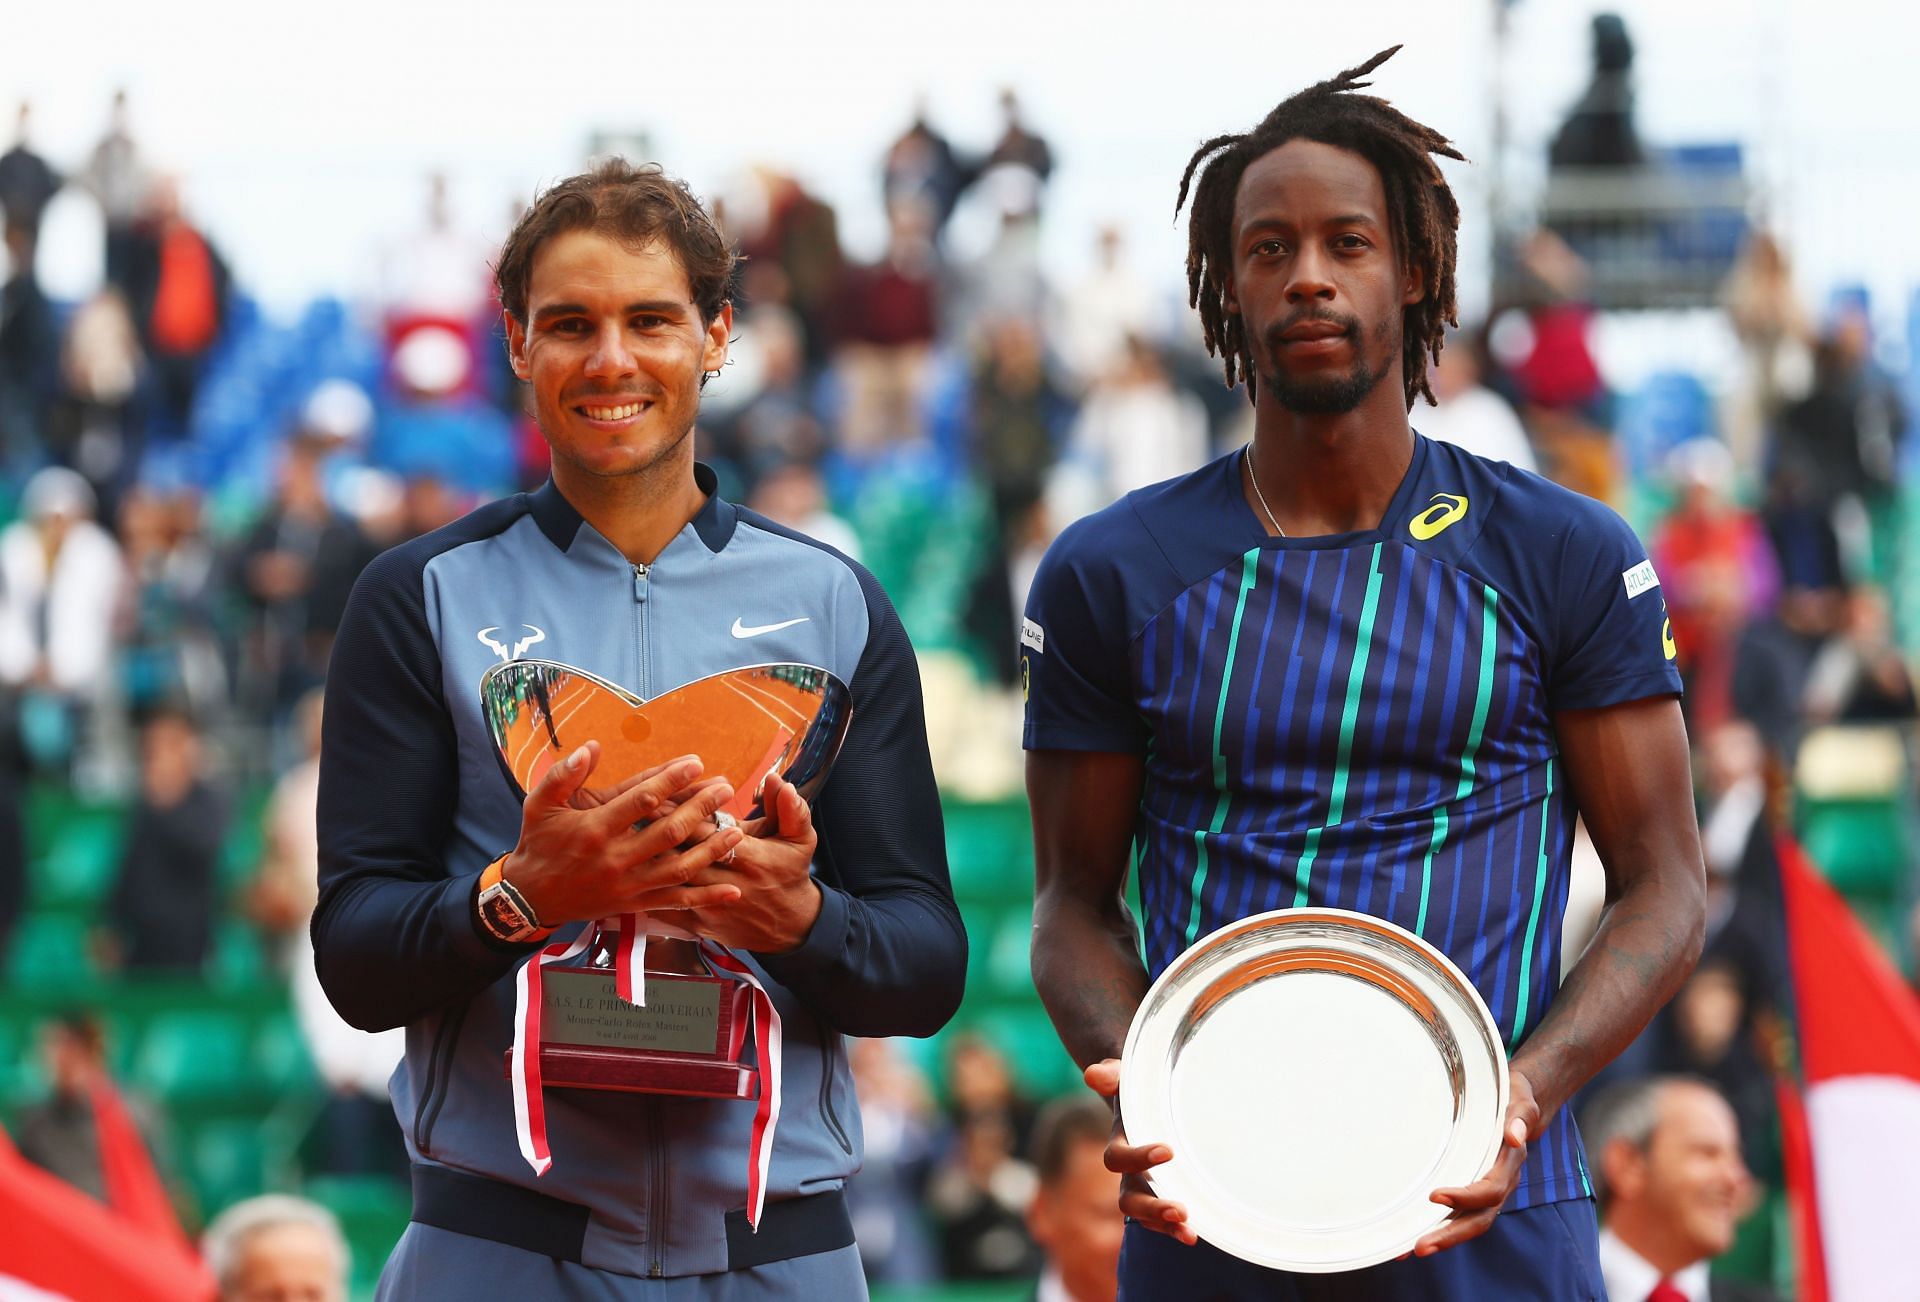 Nadal won the Monte-Carlo trophy back in 2016 after missing out for three years